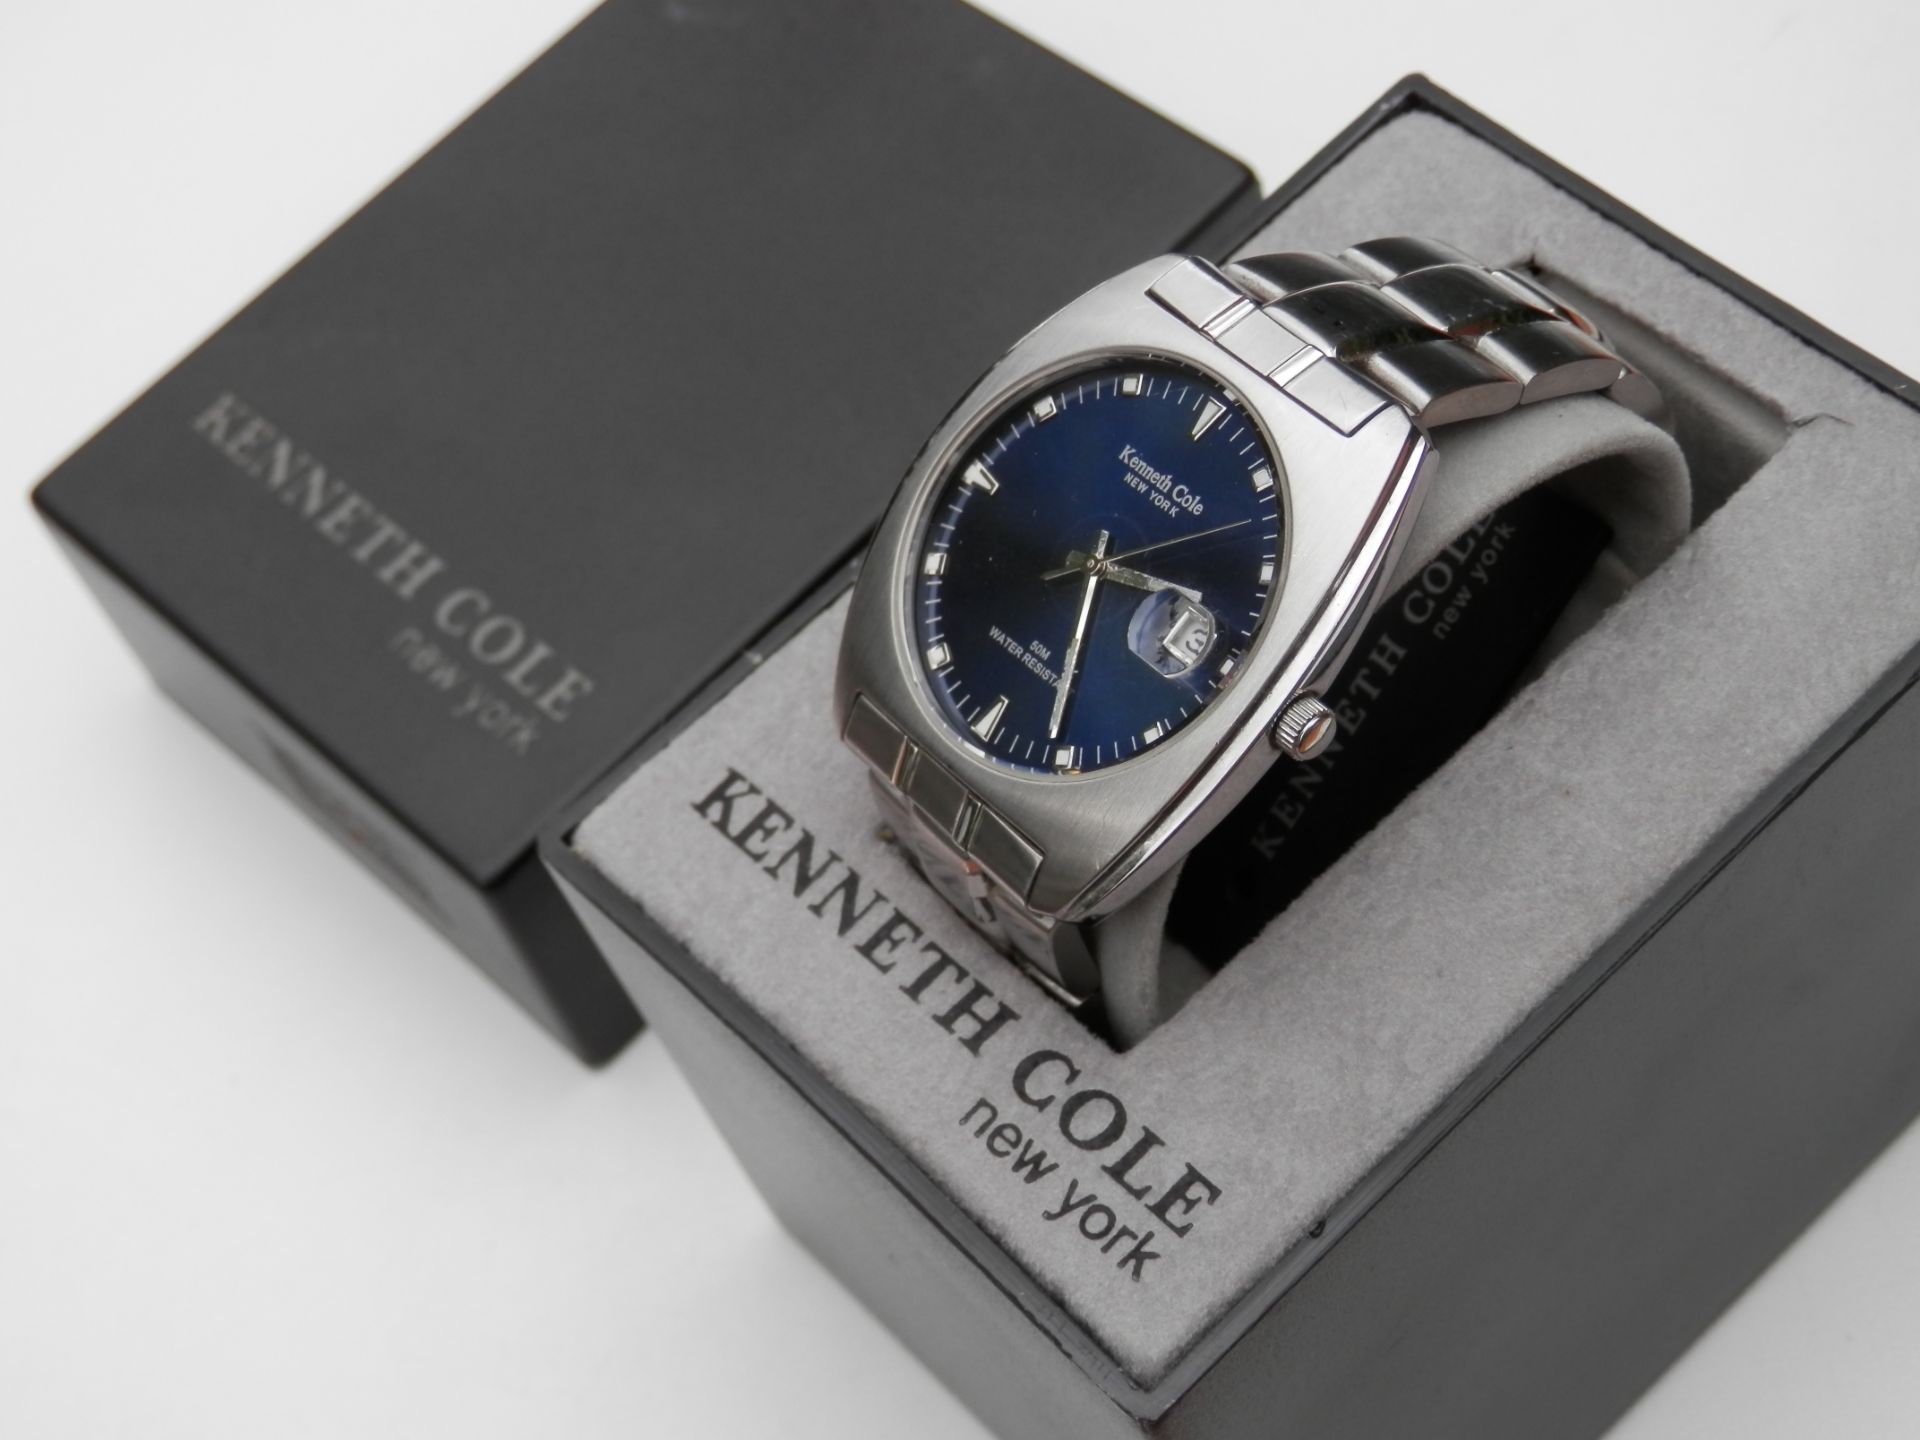 GENTS BOXED KENNETH COLE NEW YORK, FULL STAINLESS 50M WR QUARTZ DATE WATCH, FULLY WORKING. RRP $125